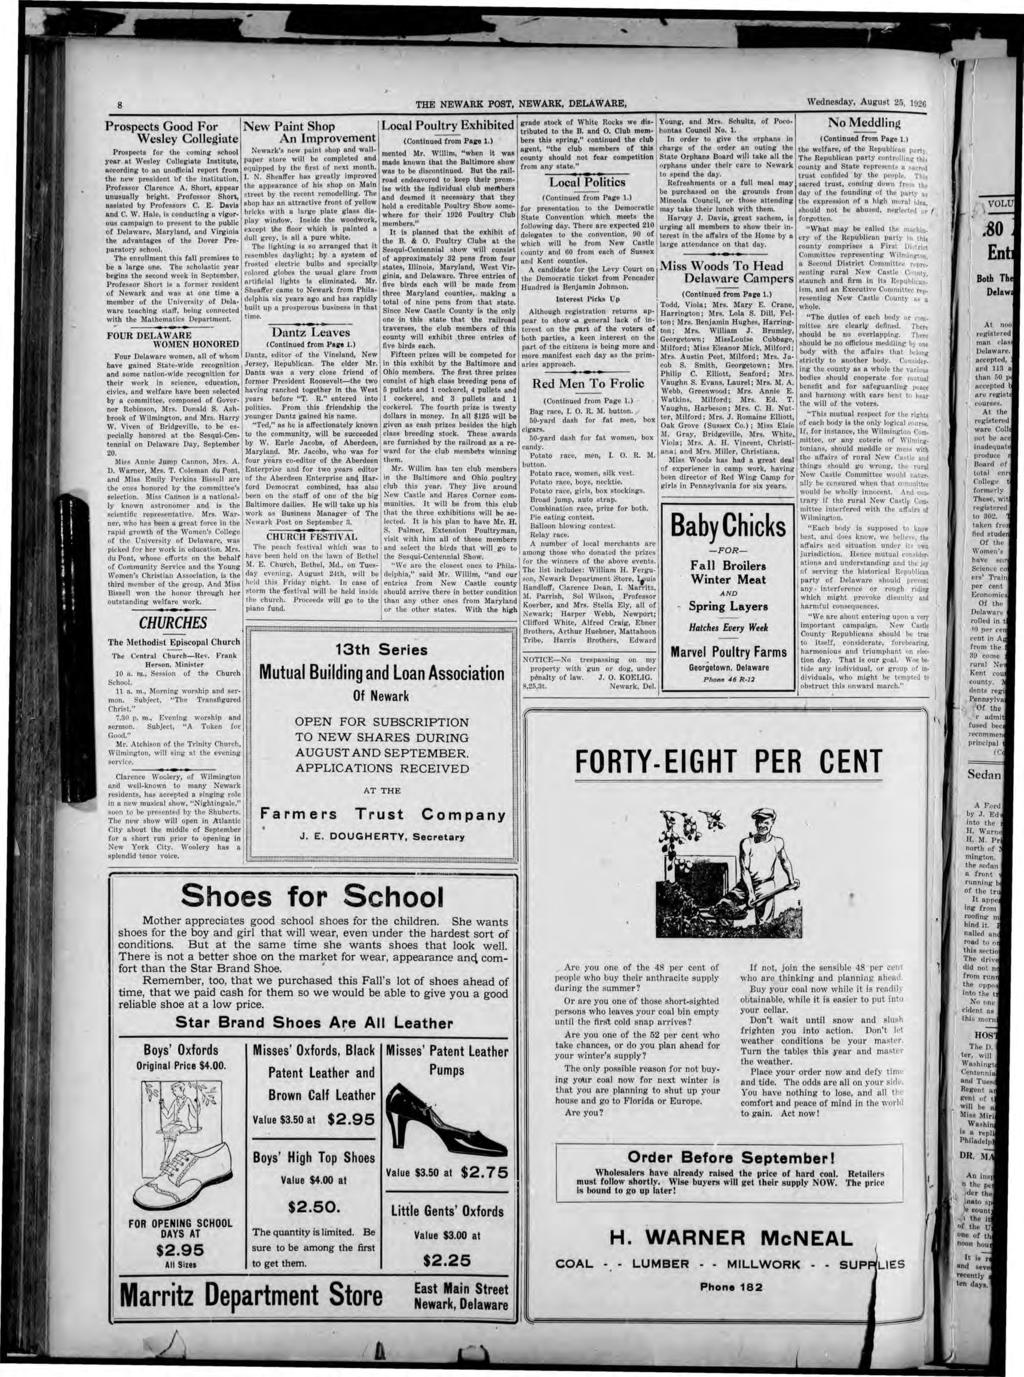 8 THE NEWARK POST, NEWARK, DELAWARE, Wednesday, Augu t 25, 1926 Prospects Good For N ew P aint Shop Local Poultry Exhibited Wesley Collegiate A n mprovement (Continued from Pa&"e 1.